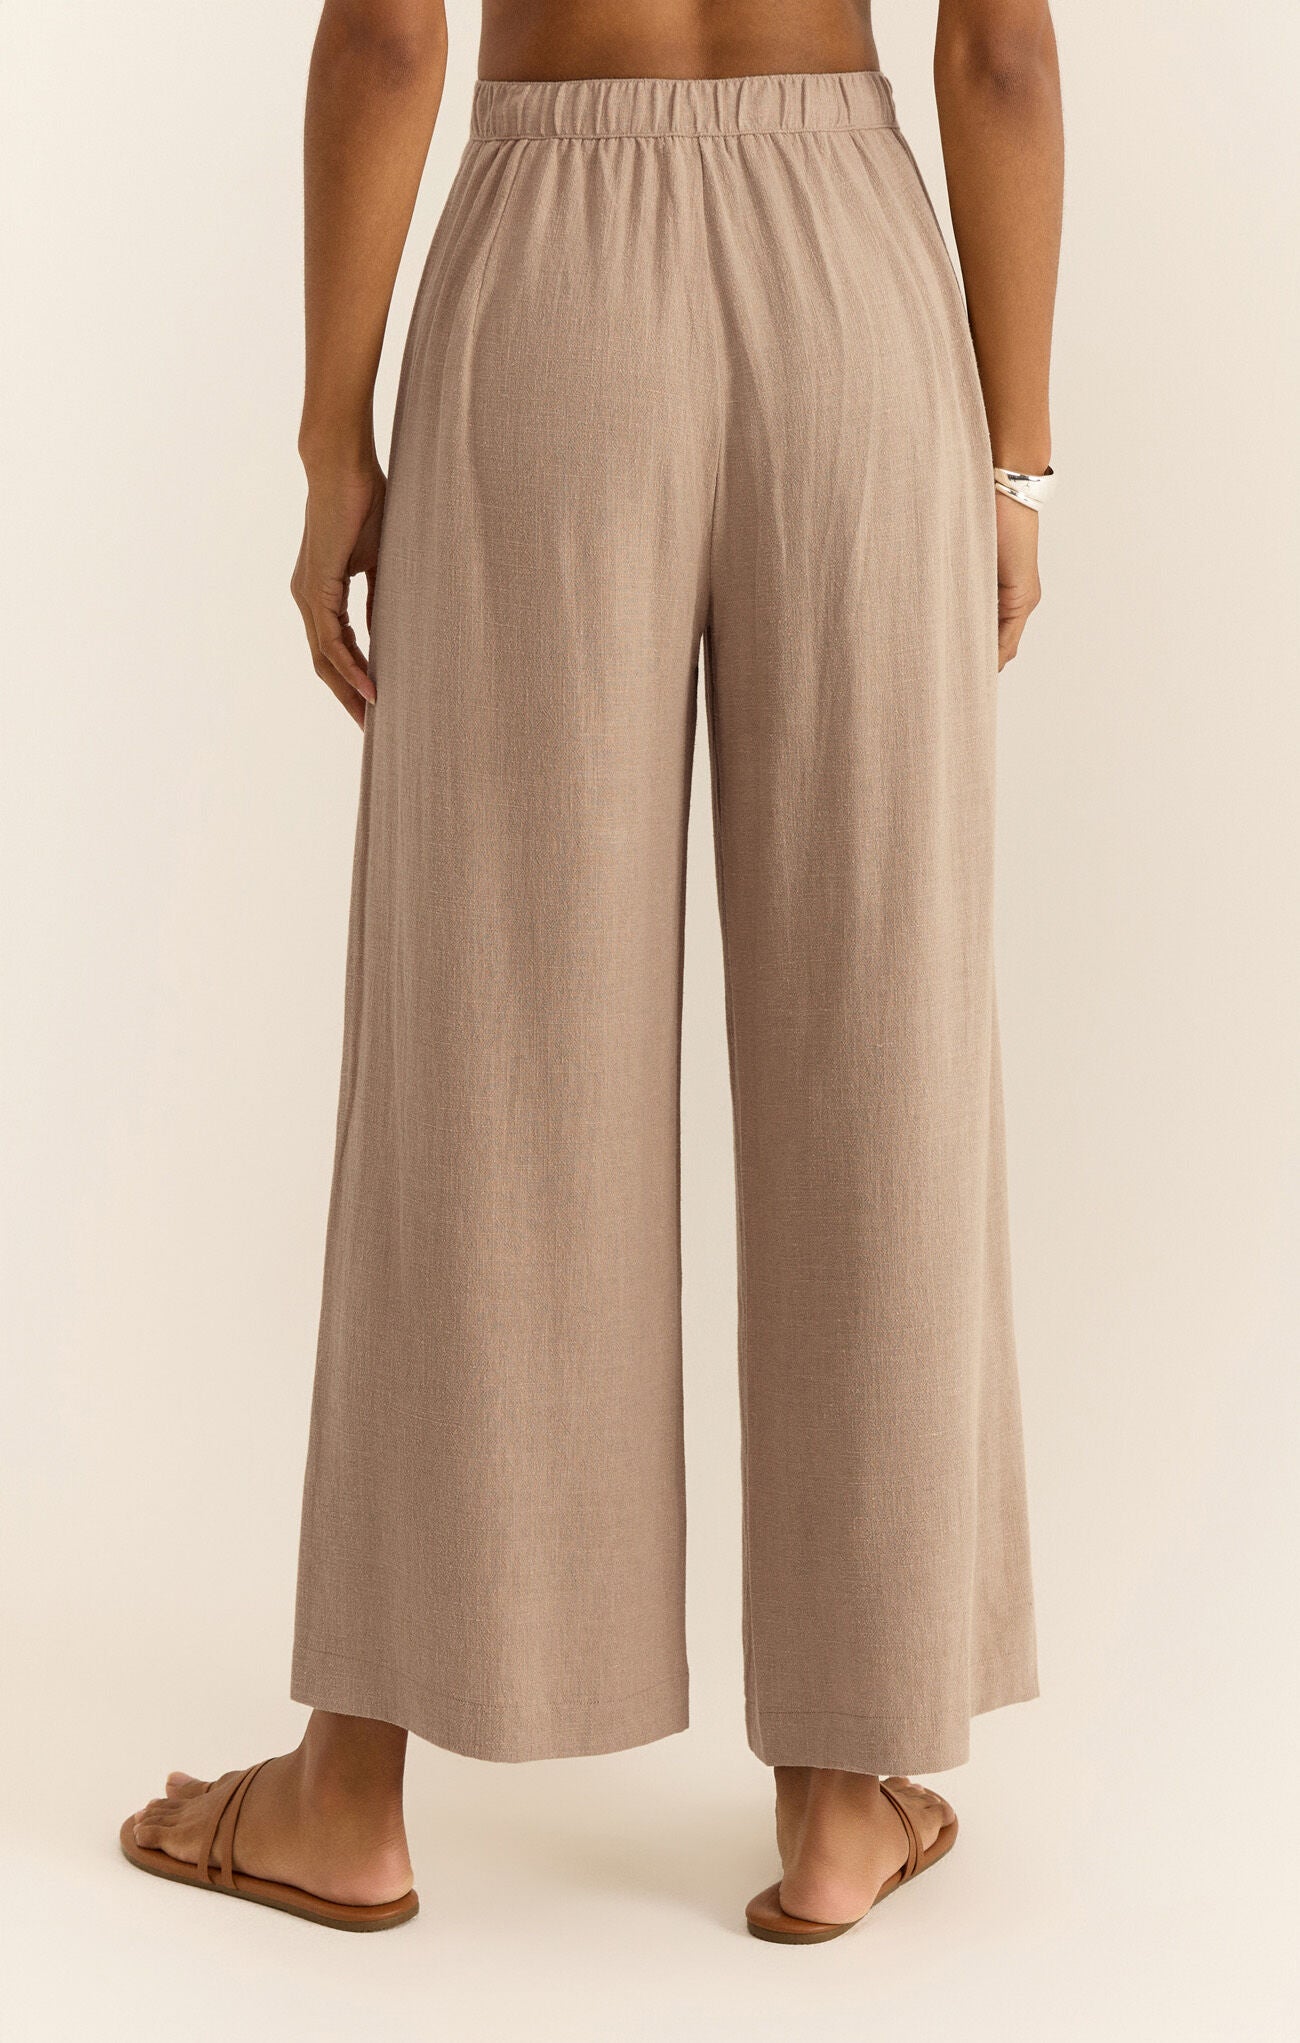 ZSupply Cortez Cropped Pant -sand